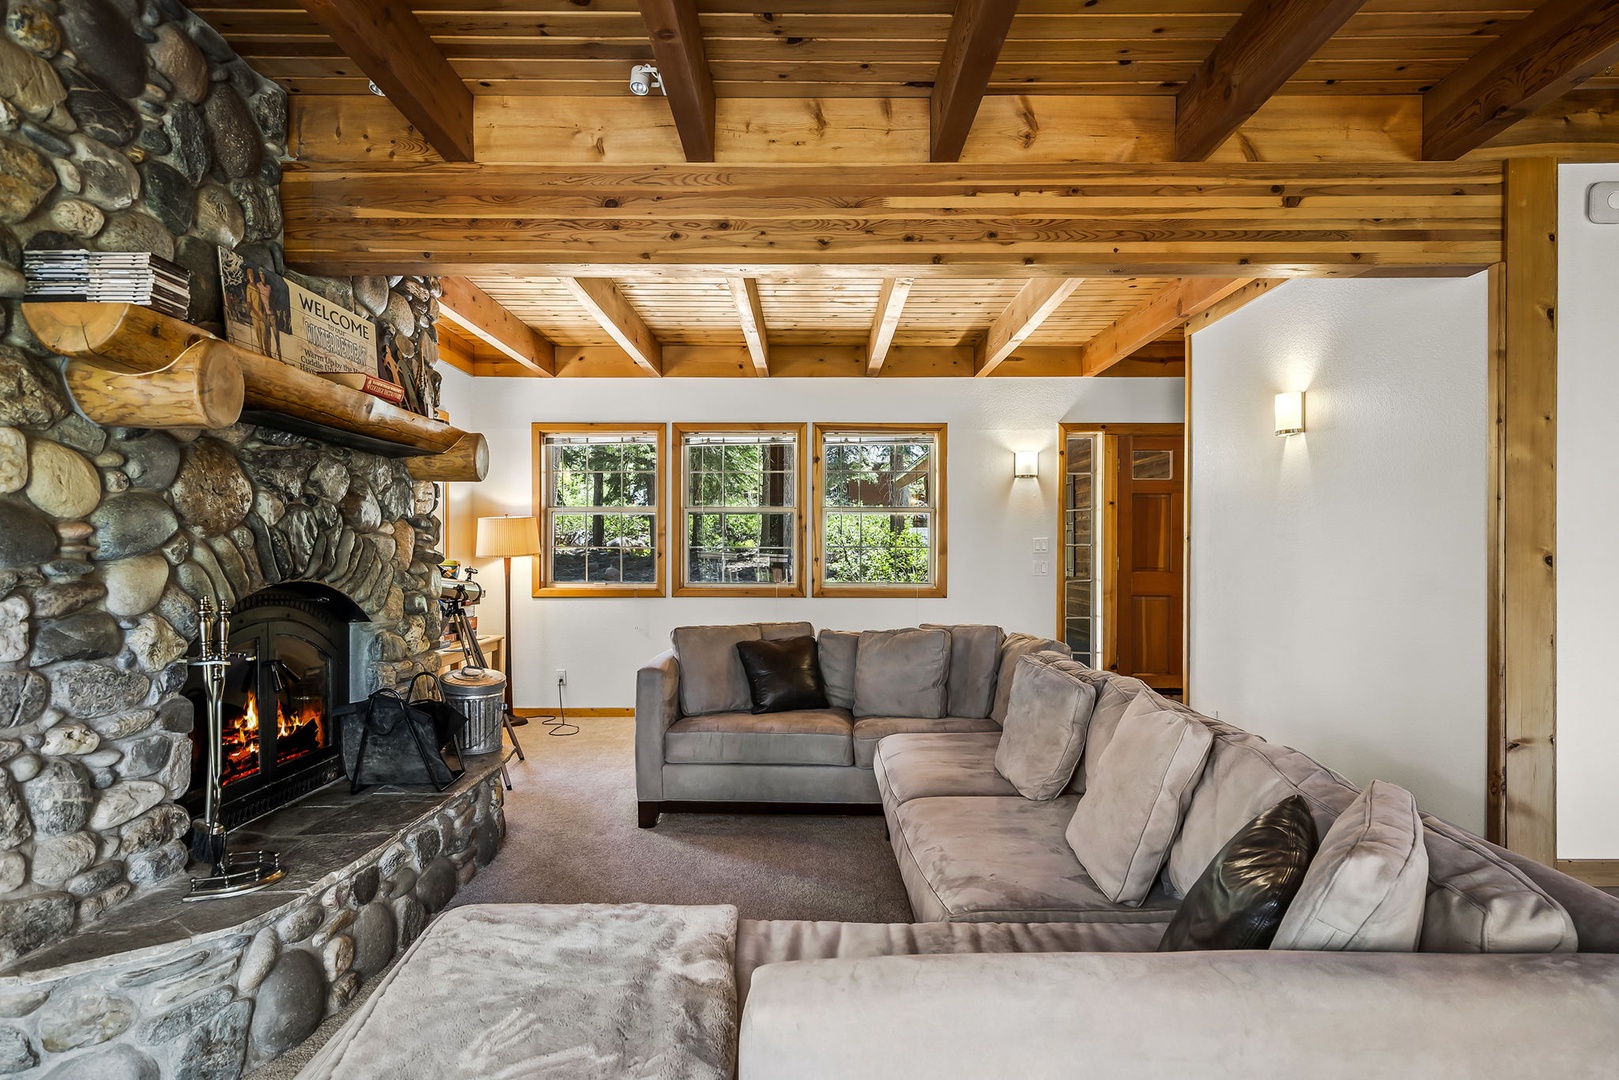 Tv room with wood fireplace: 
Donner Lake Vacation Lodge